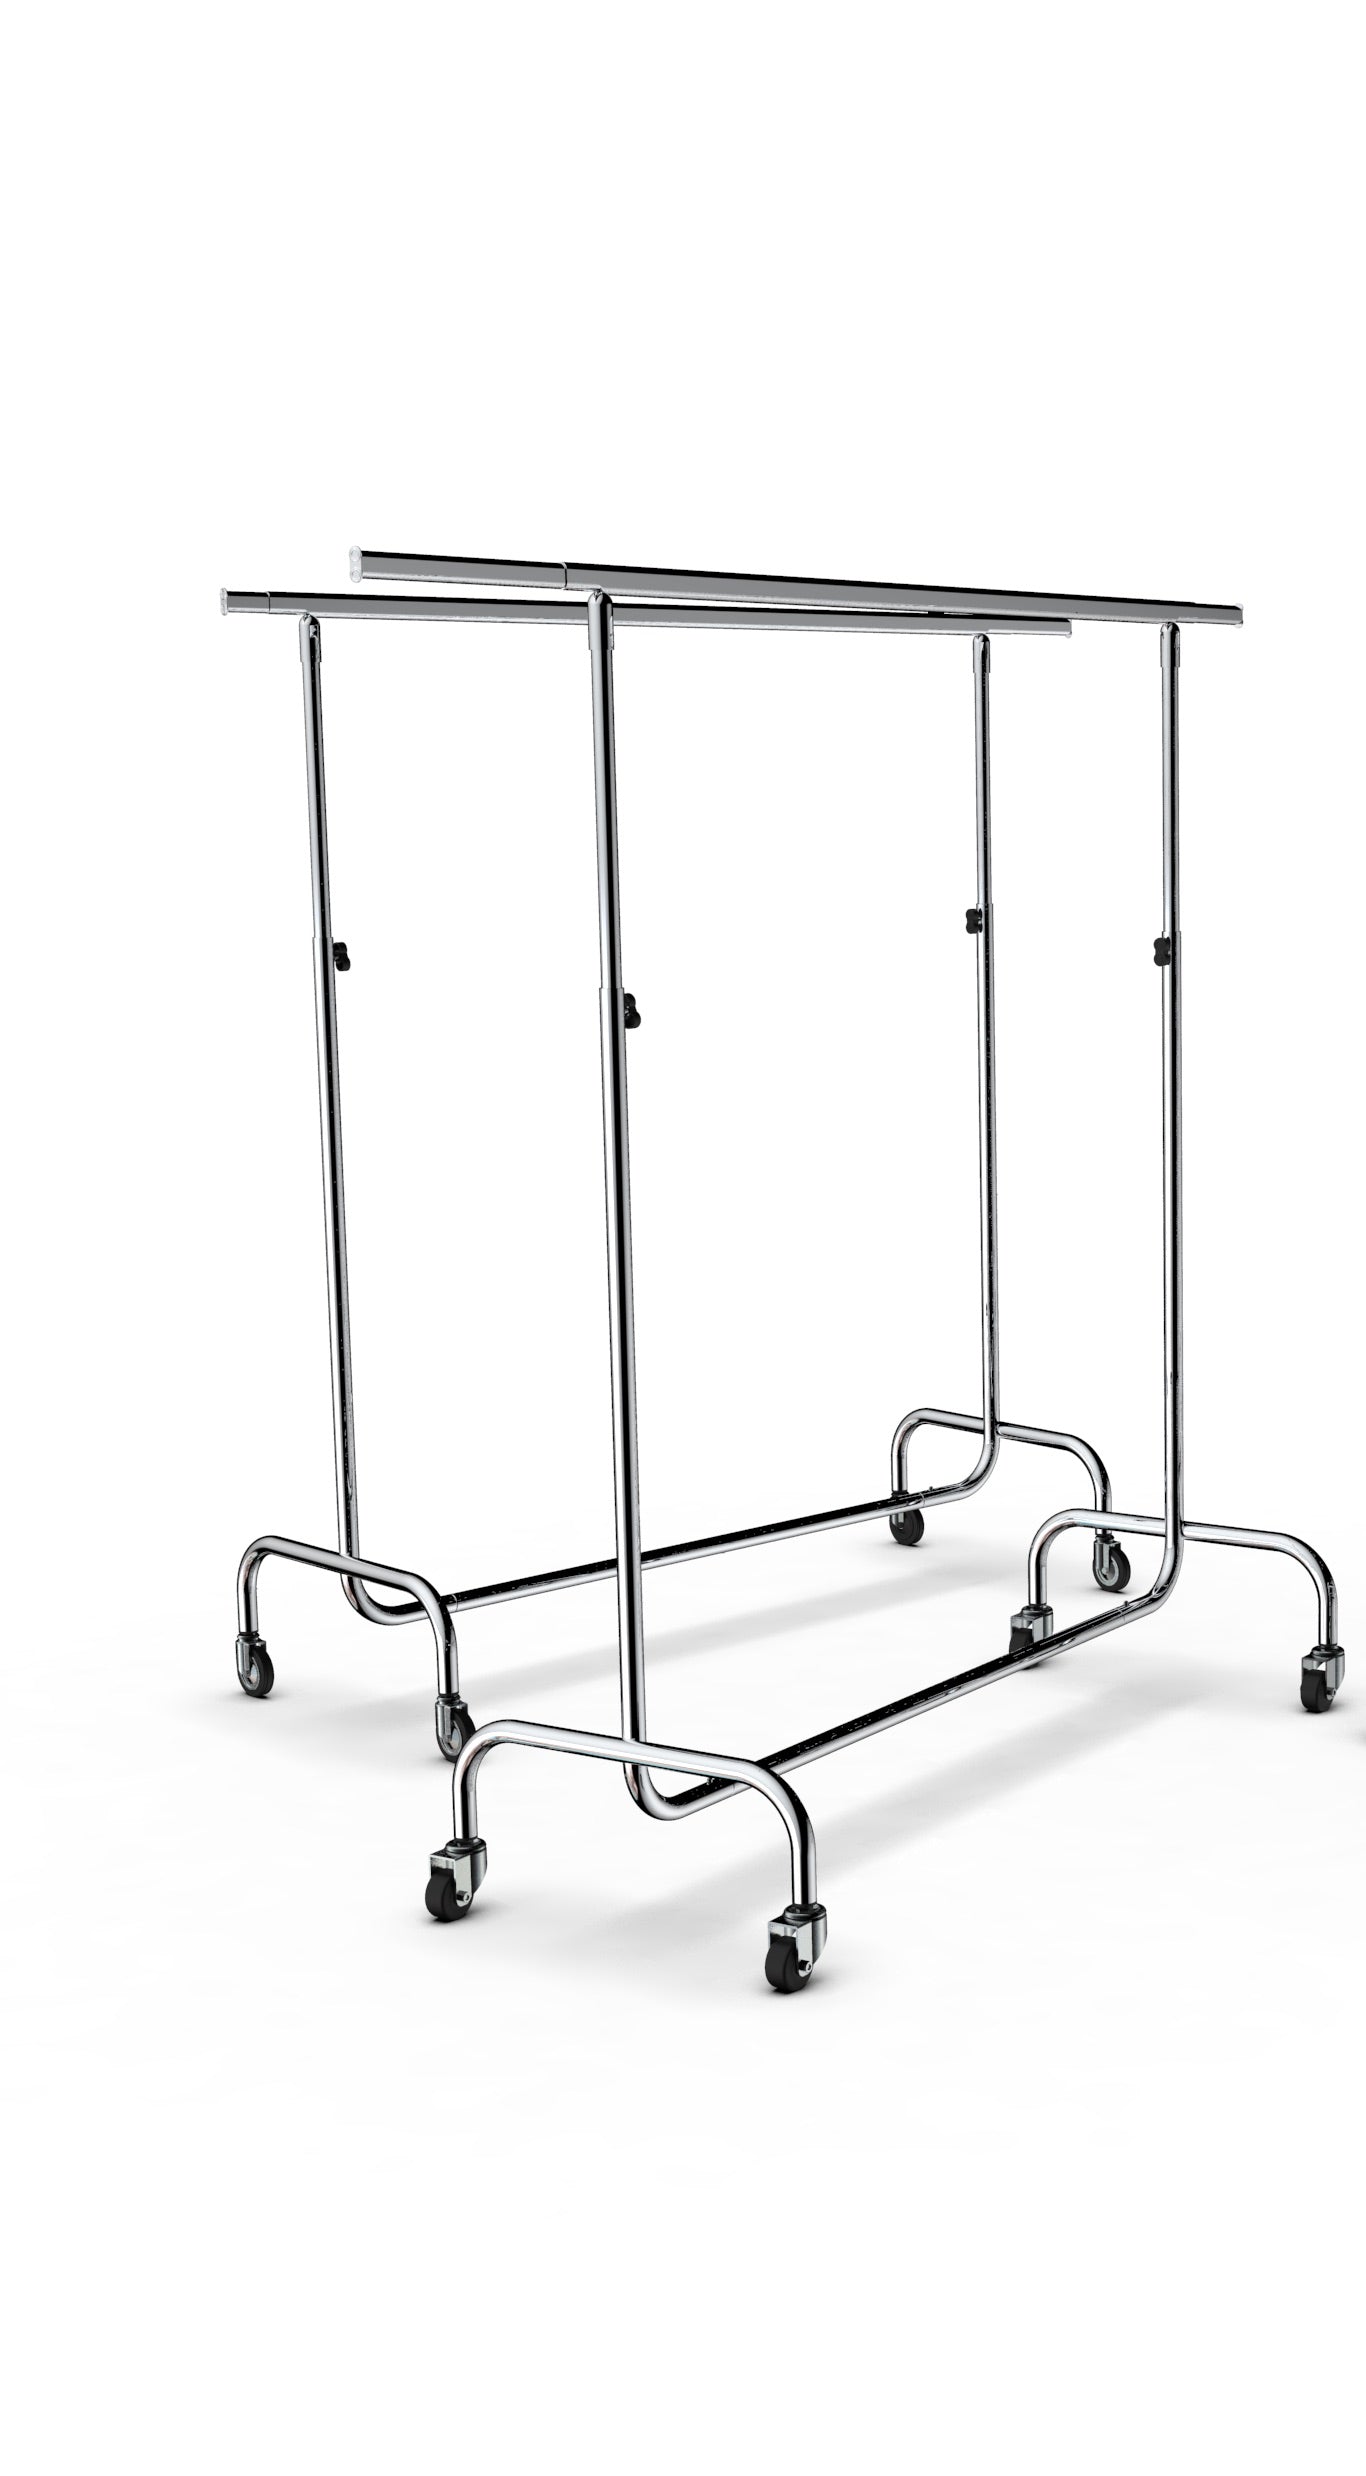 Single Clothes Stand Italy